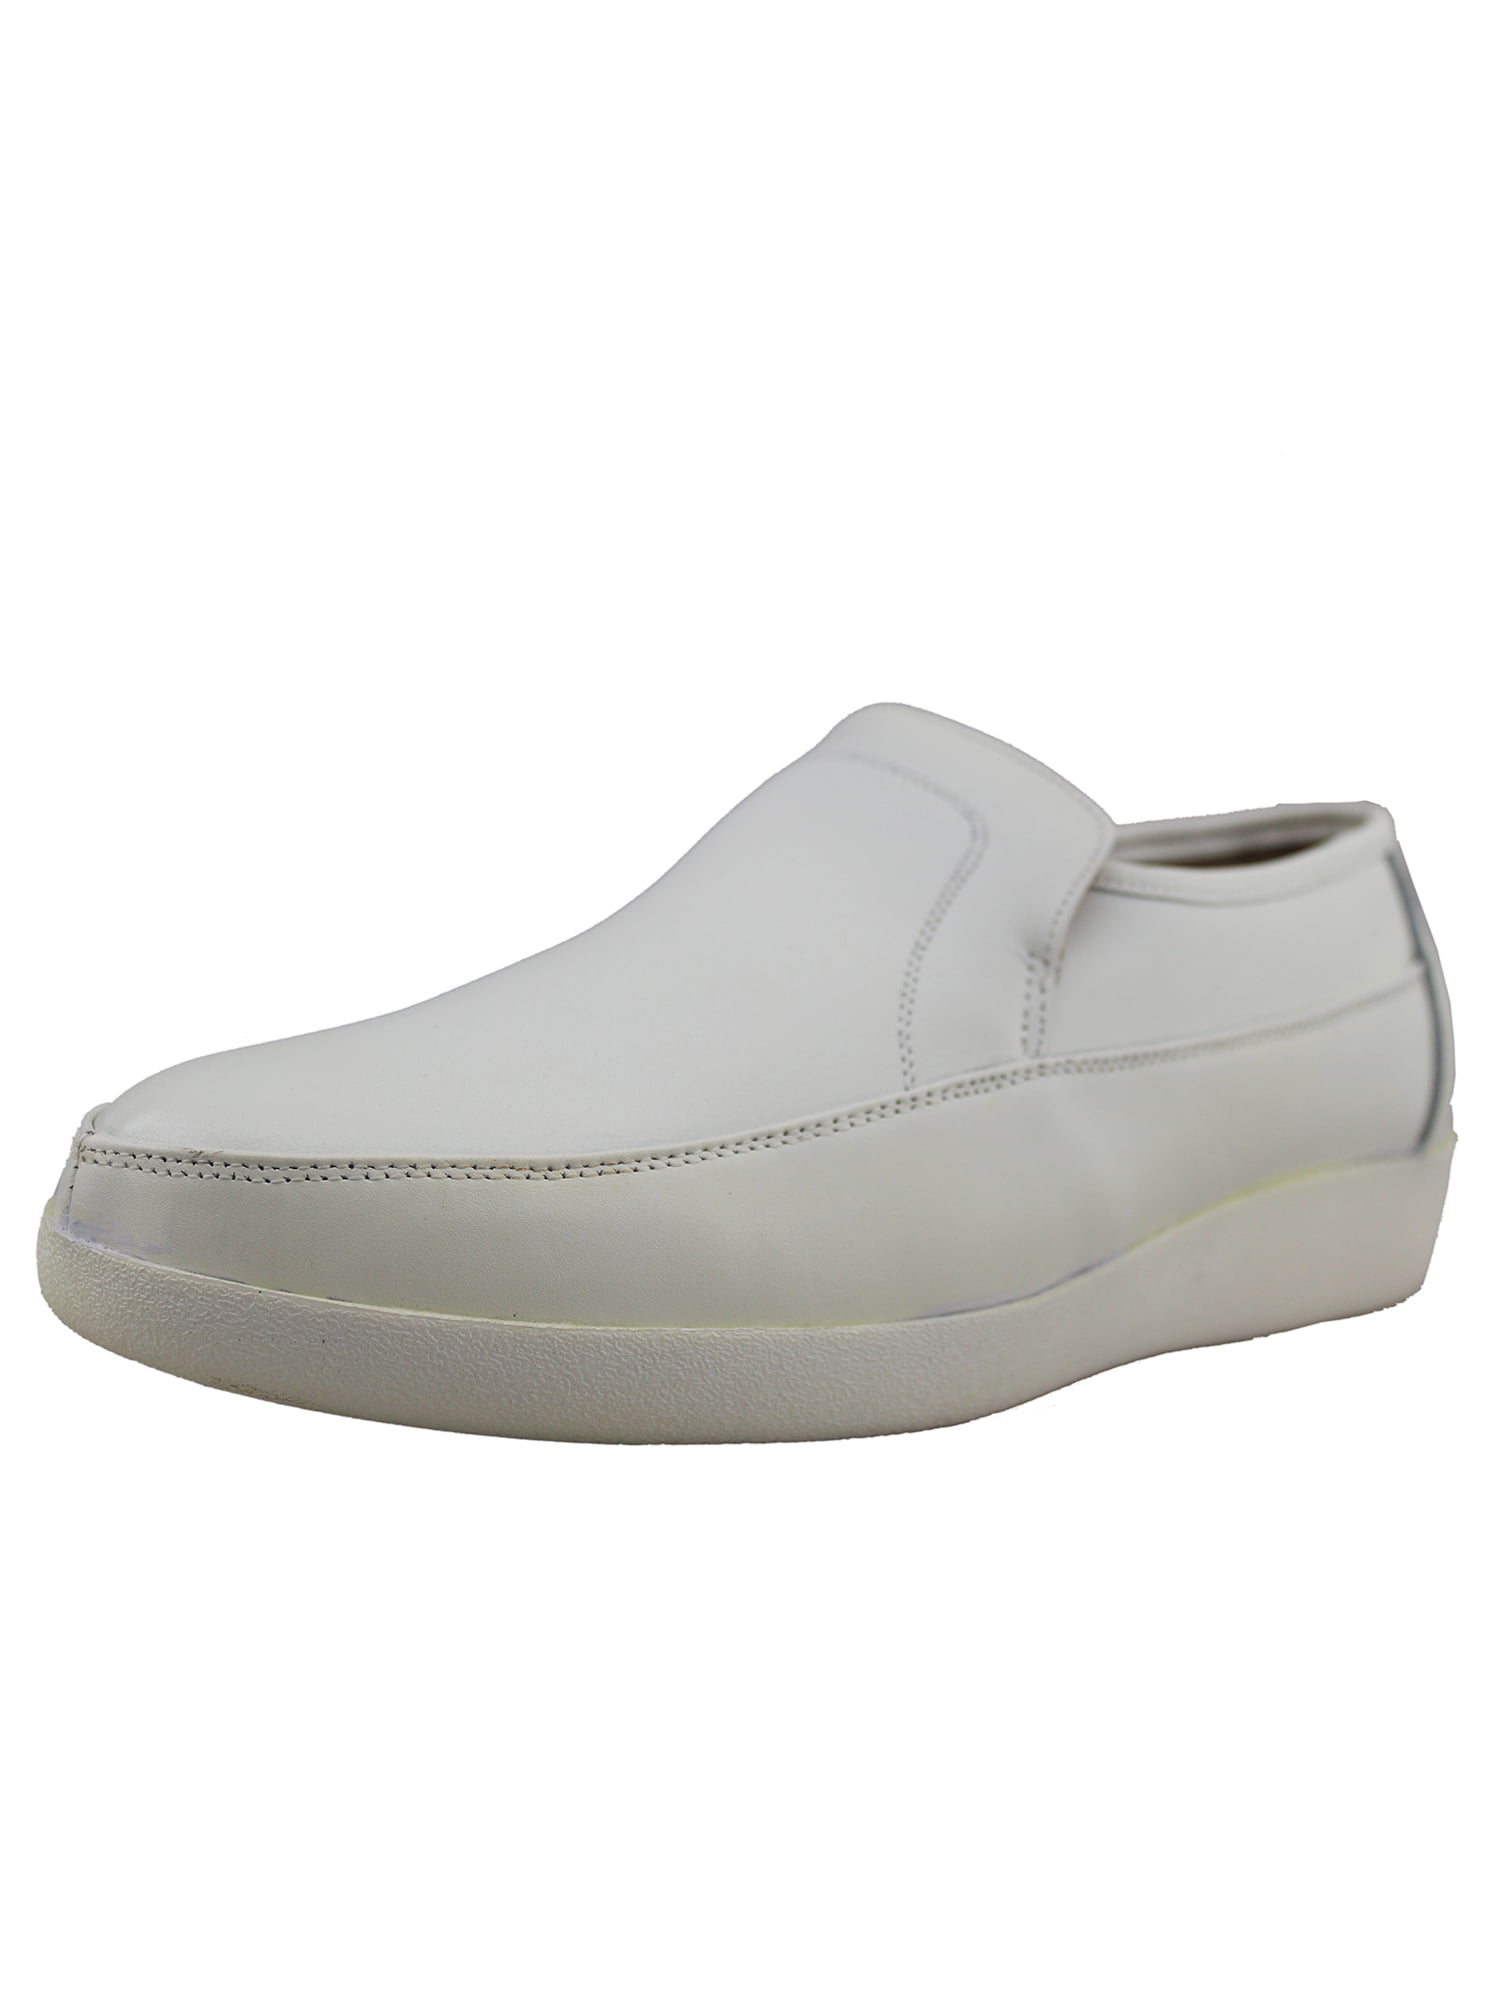 mens wide casual slip on shoes